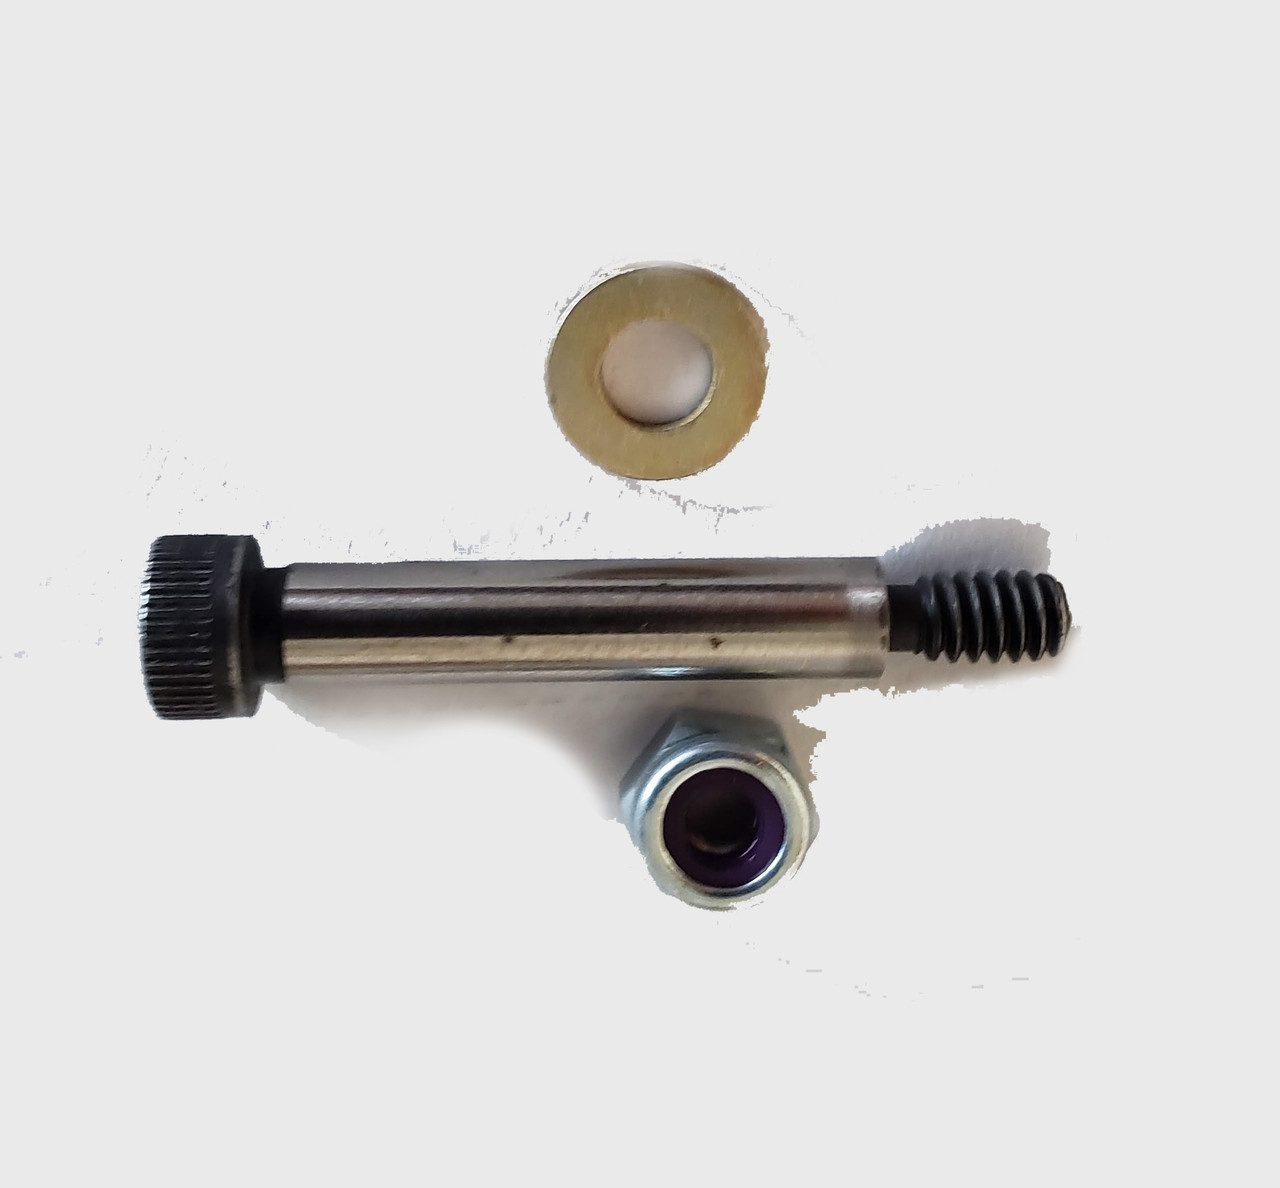 Coats Tire Machine parts  850006102 Shoulder Screw, one 81826822 Nut, and one 8301805 Washer.